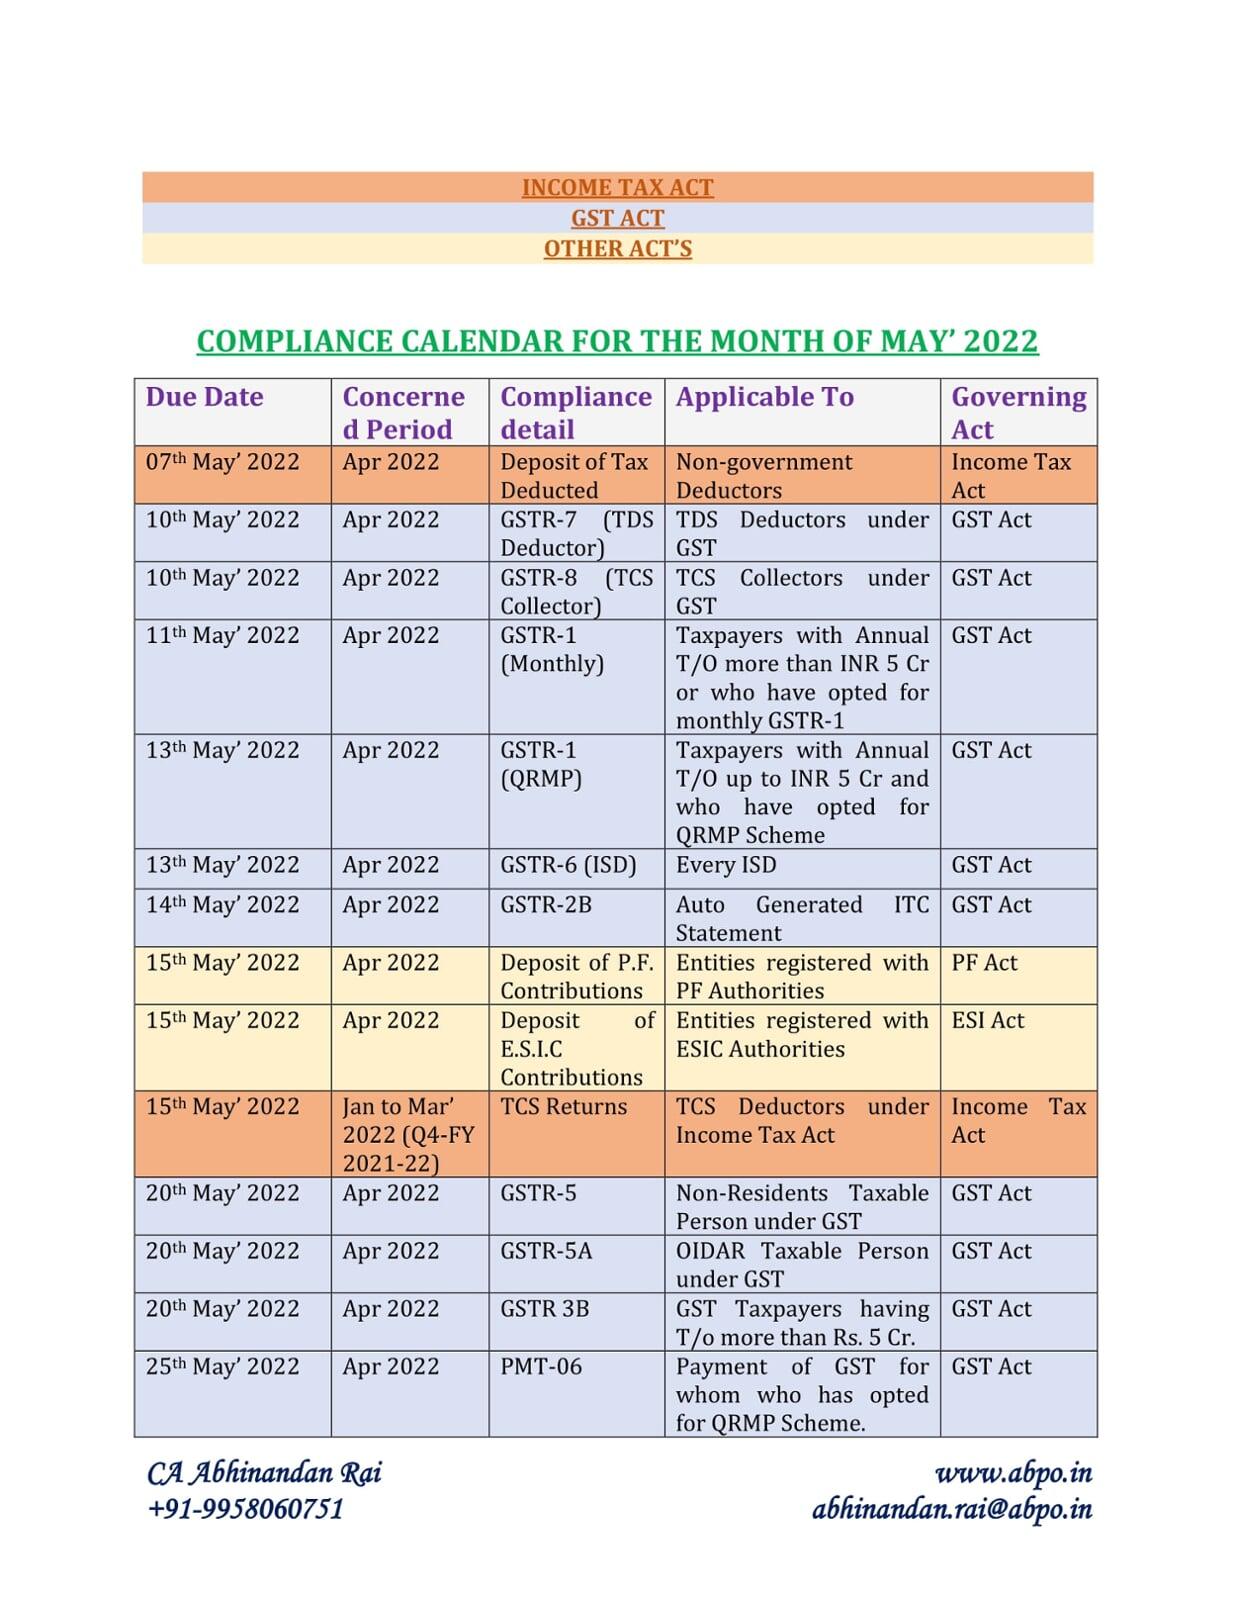 COMPLIANCE / DUE DATE CALENDAR FOR THE MONTH OF MAY 2022